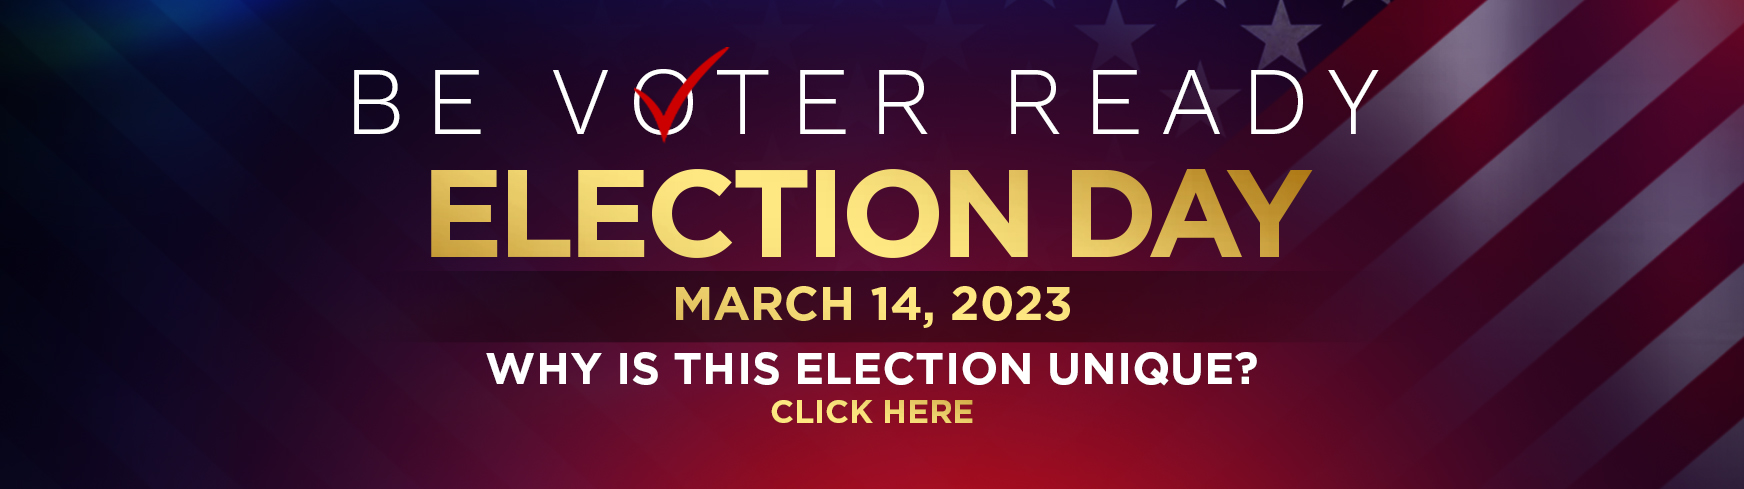 Election Day Mar. 14